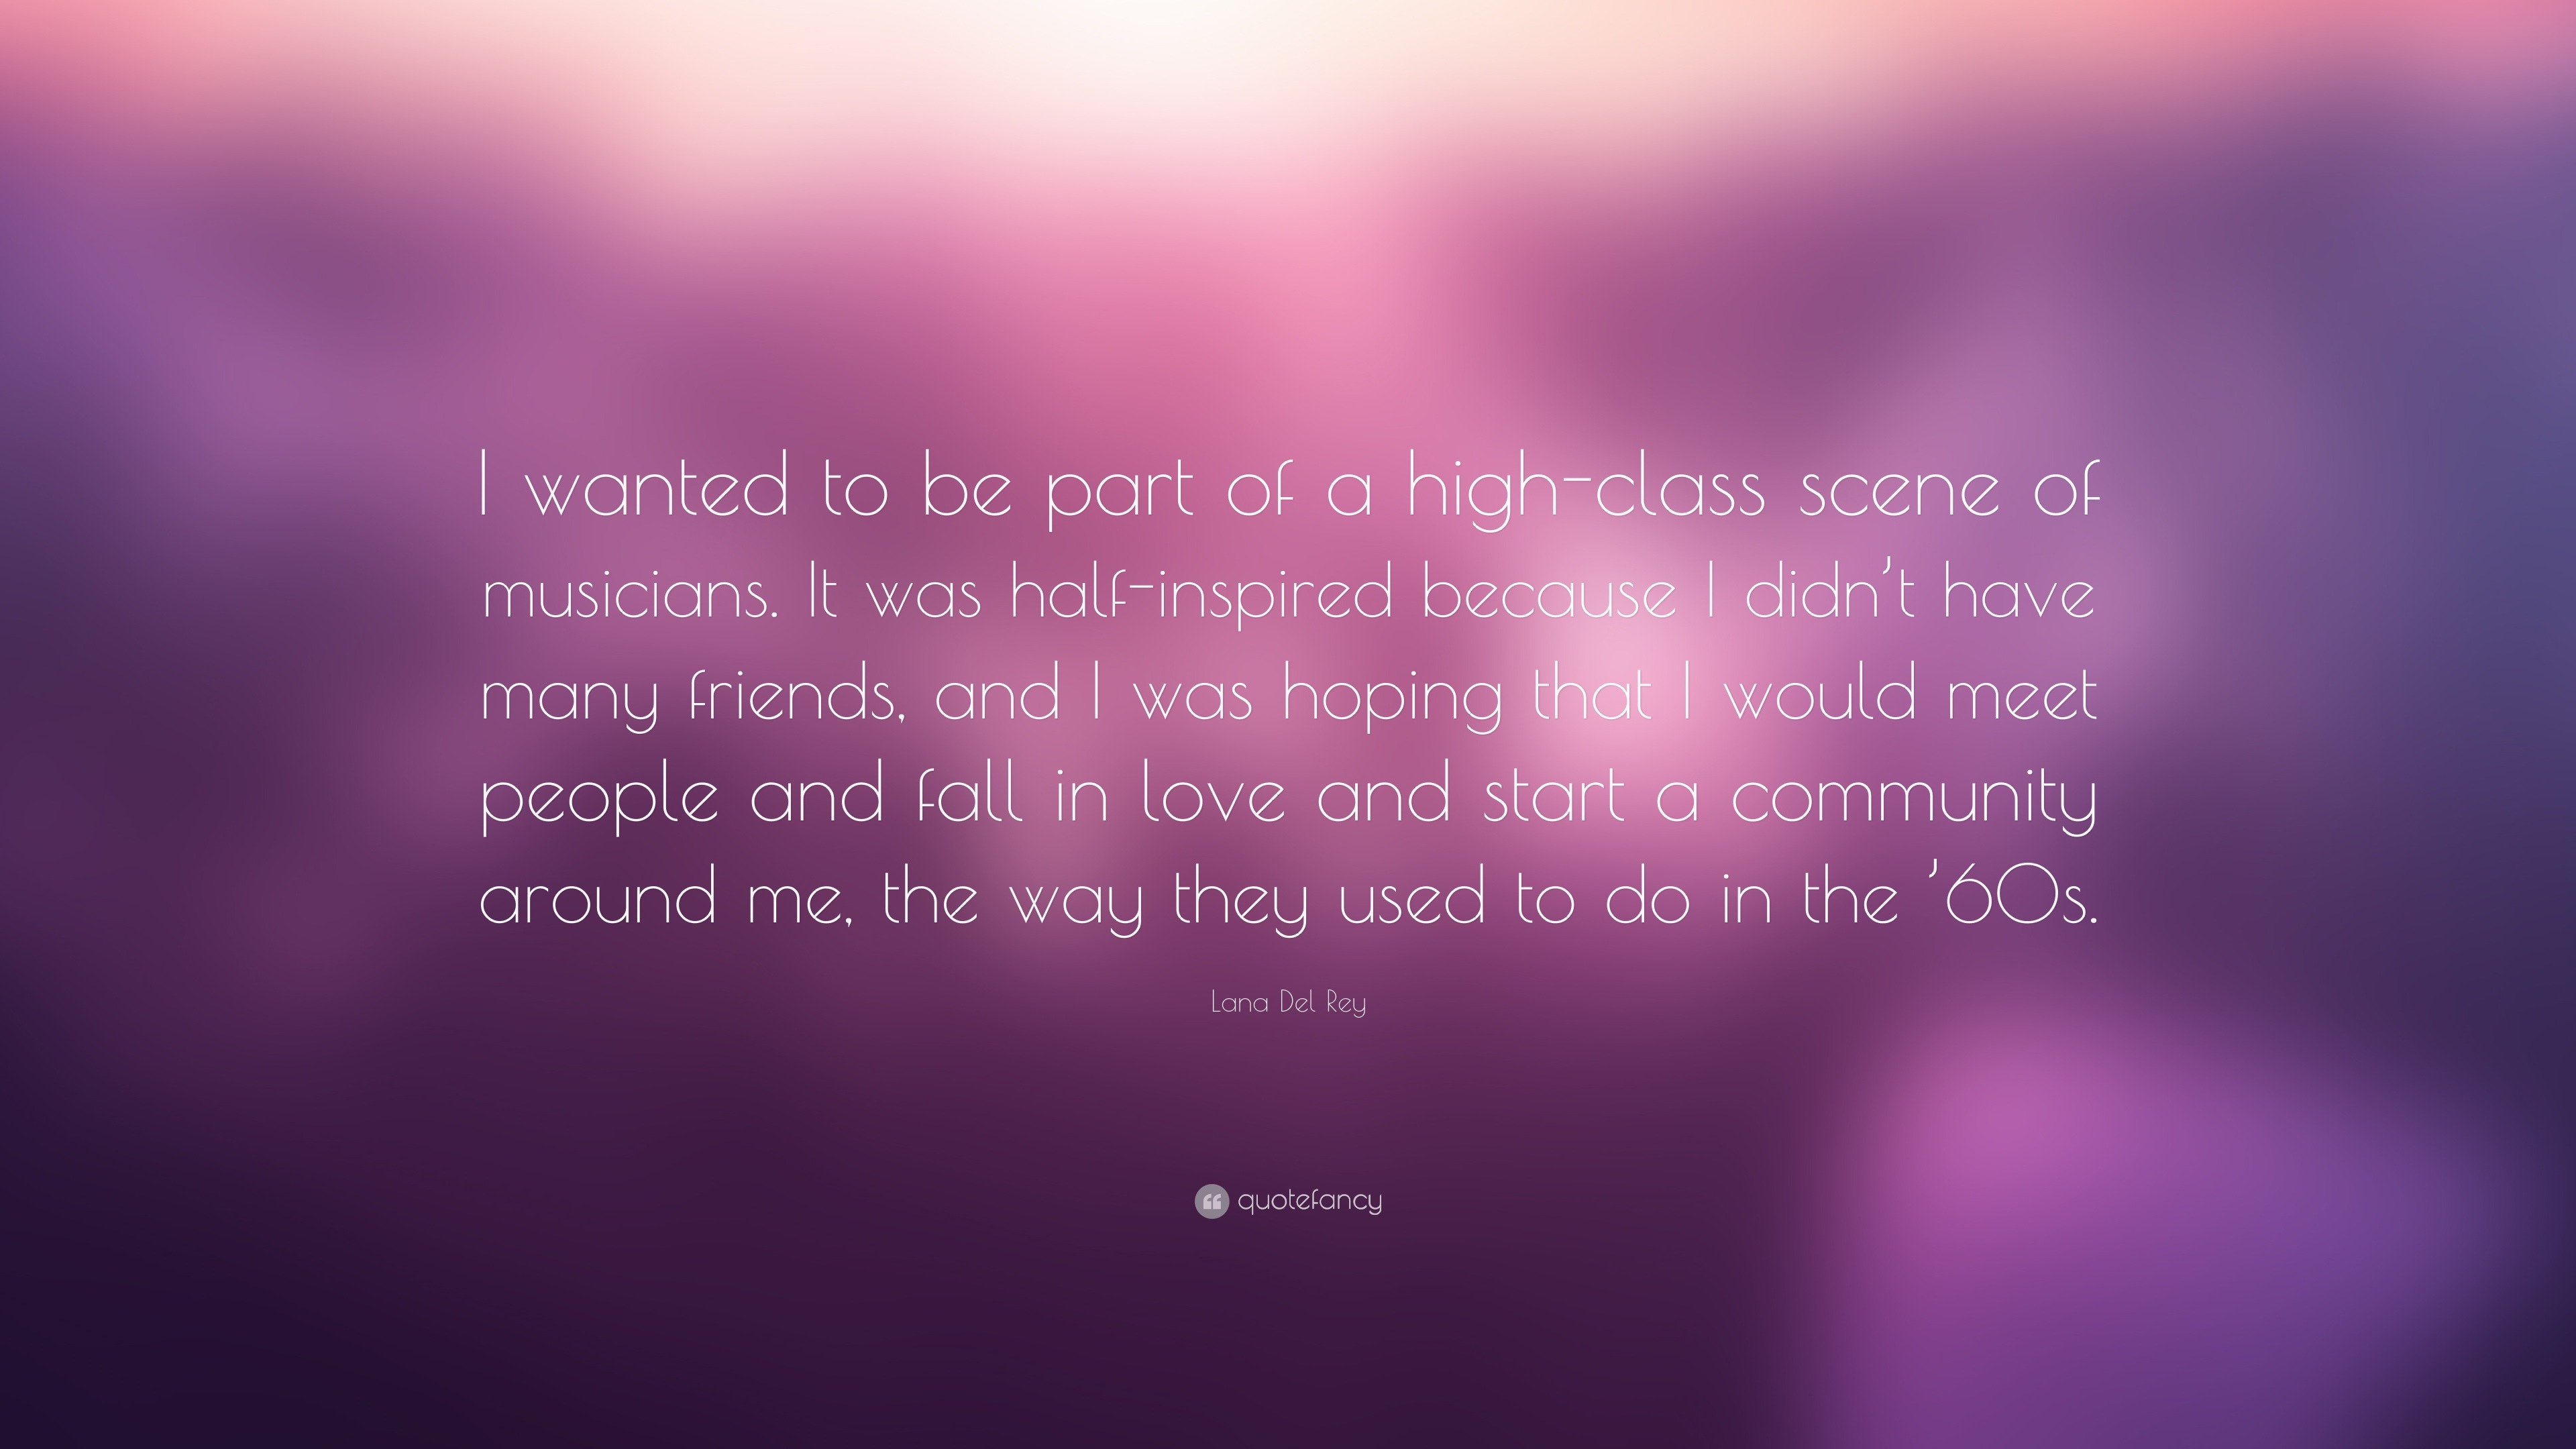 Lana Del Rey Quote “I wanted to be part of a high class